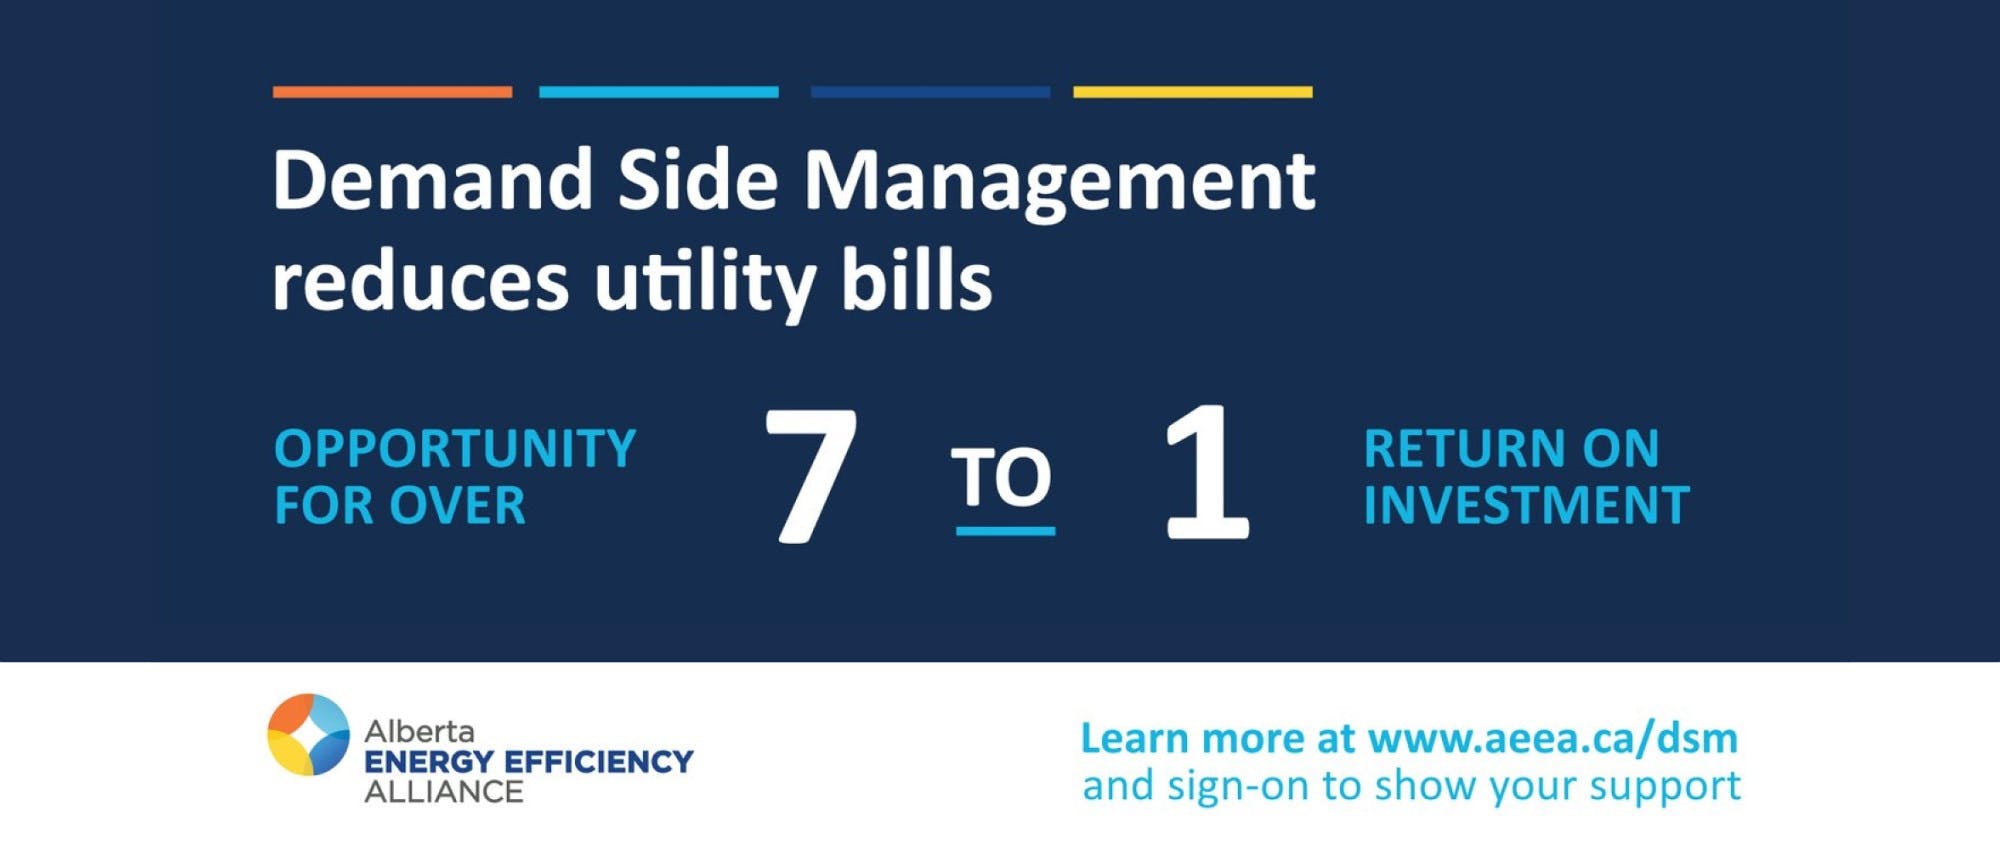 Demand side management reduces utility bills with a 7 to 1 return on investment.